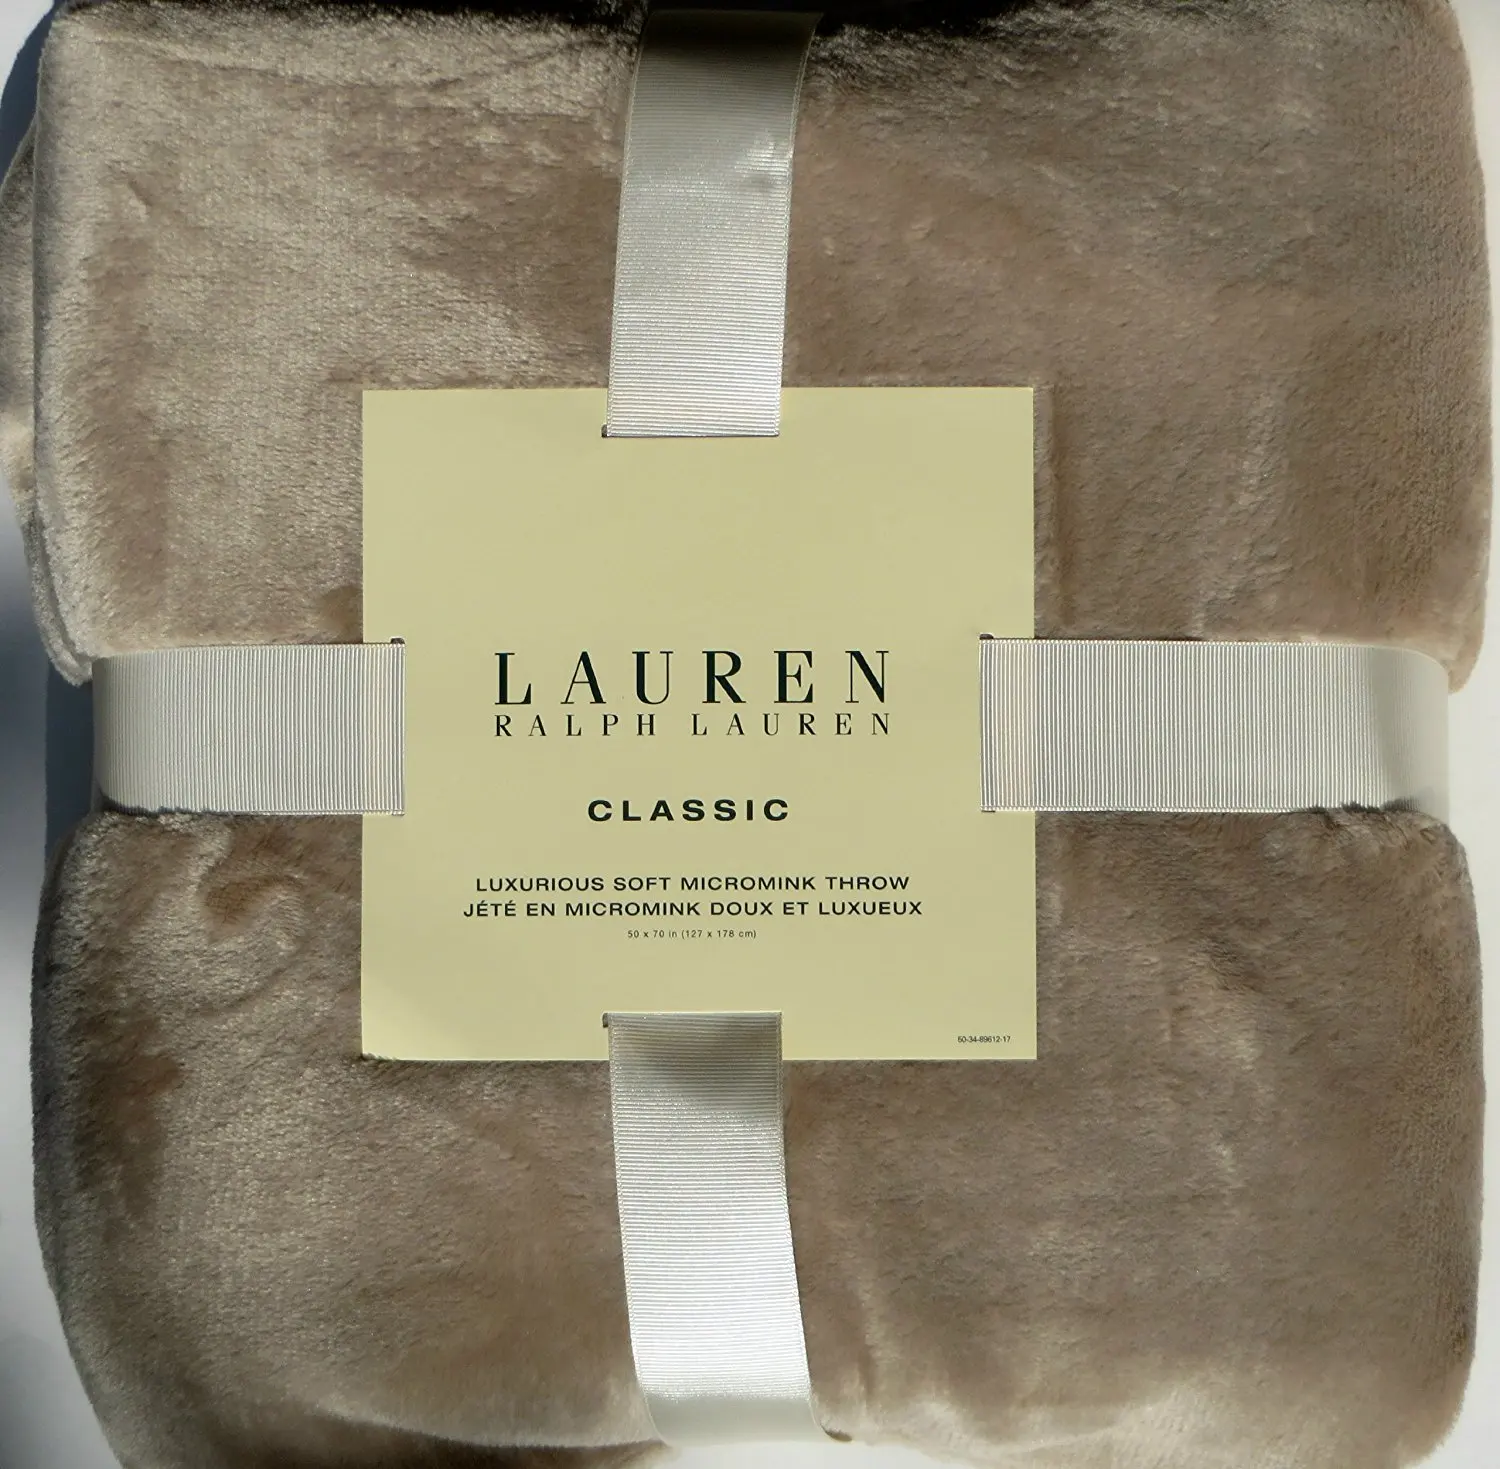 Buy Throw Blanket Ralph Lauren Classic Luxurious Soft Micromink 50 X 70 Linen Tan In Cheap Price On Alibabacom